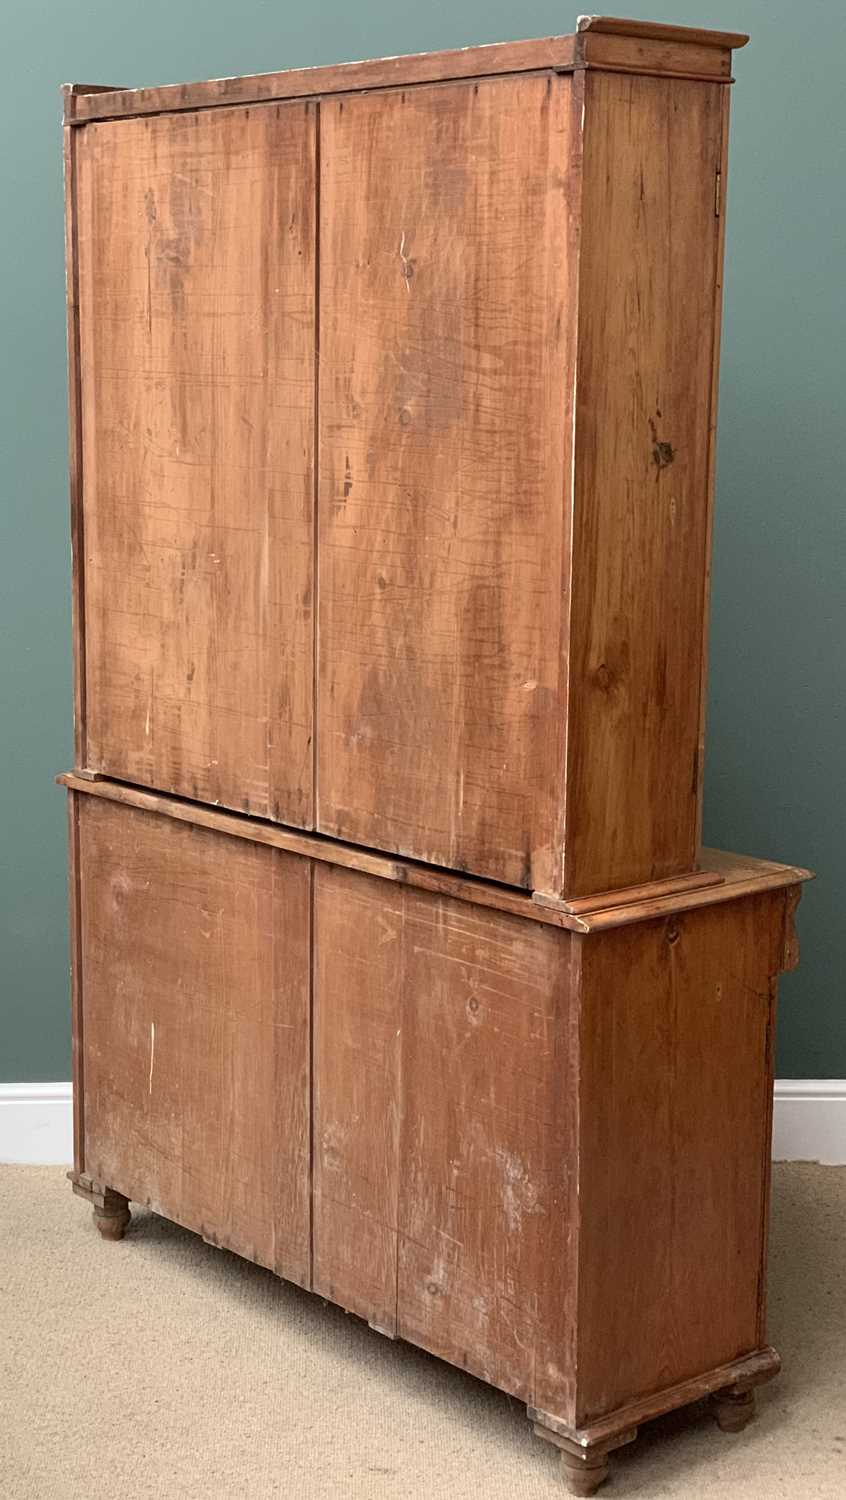 ANTIQUE PINE BOOKCASE CUPBOARD having two glazed doors over a base with central drawer and - Image 3 of 3